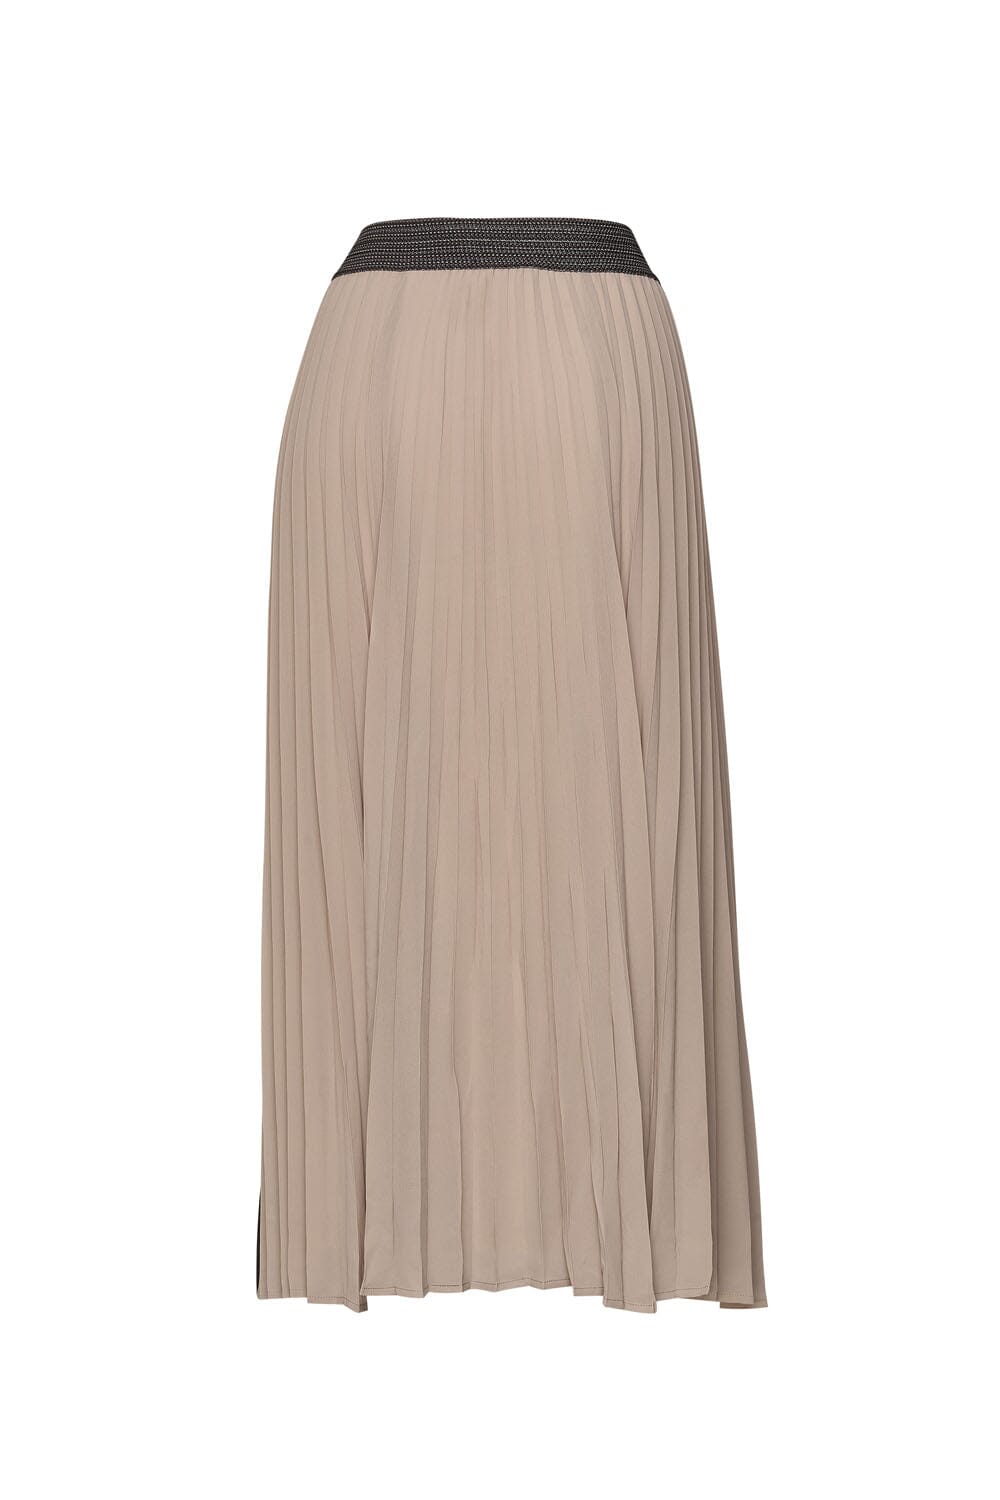 JUST PLEAT IT SKIRT TAUPE